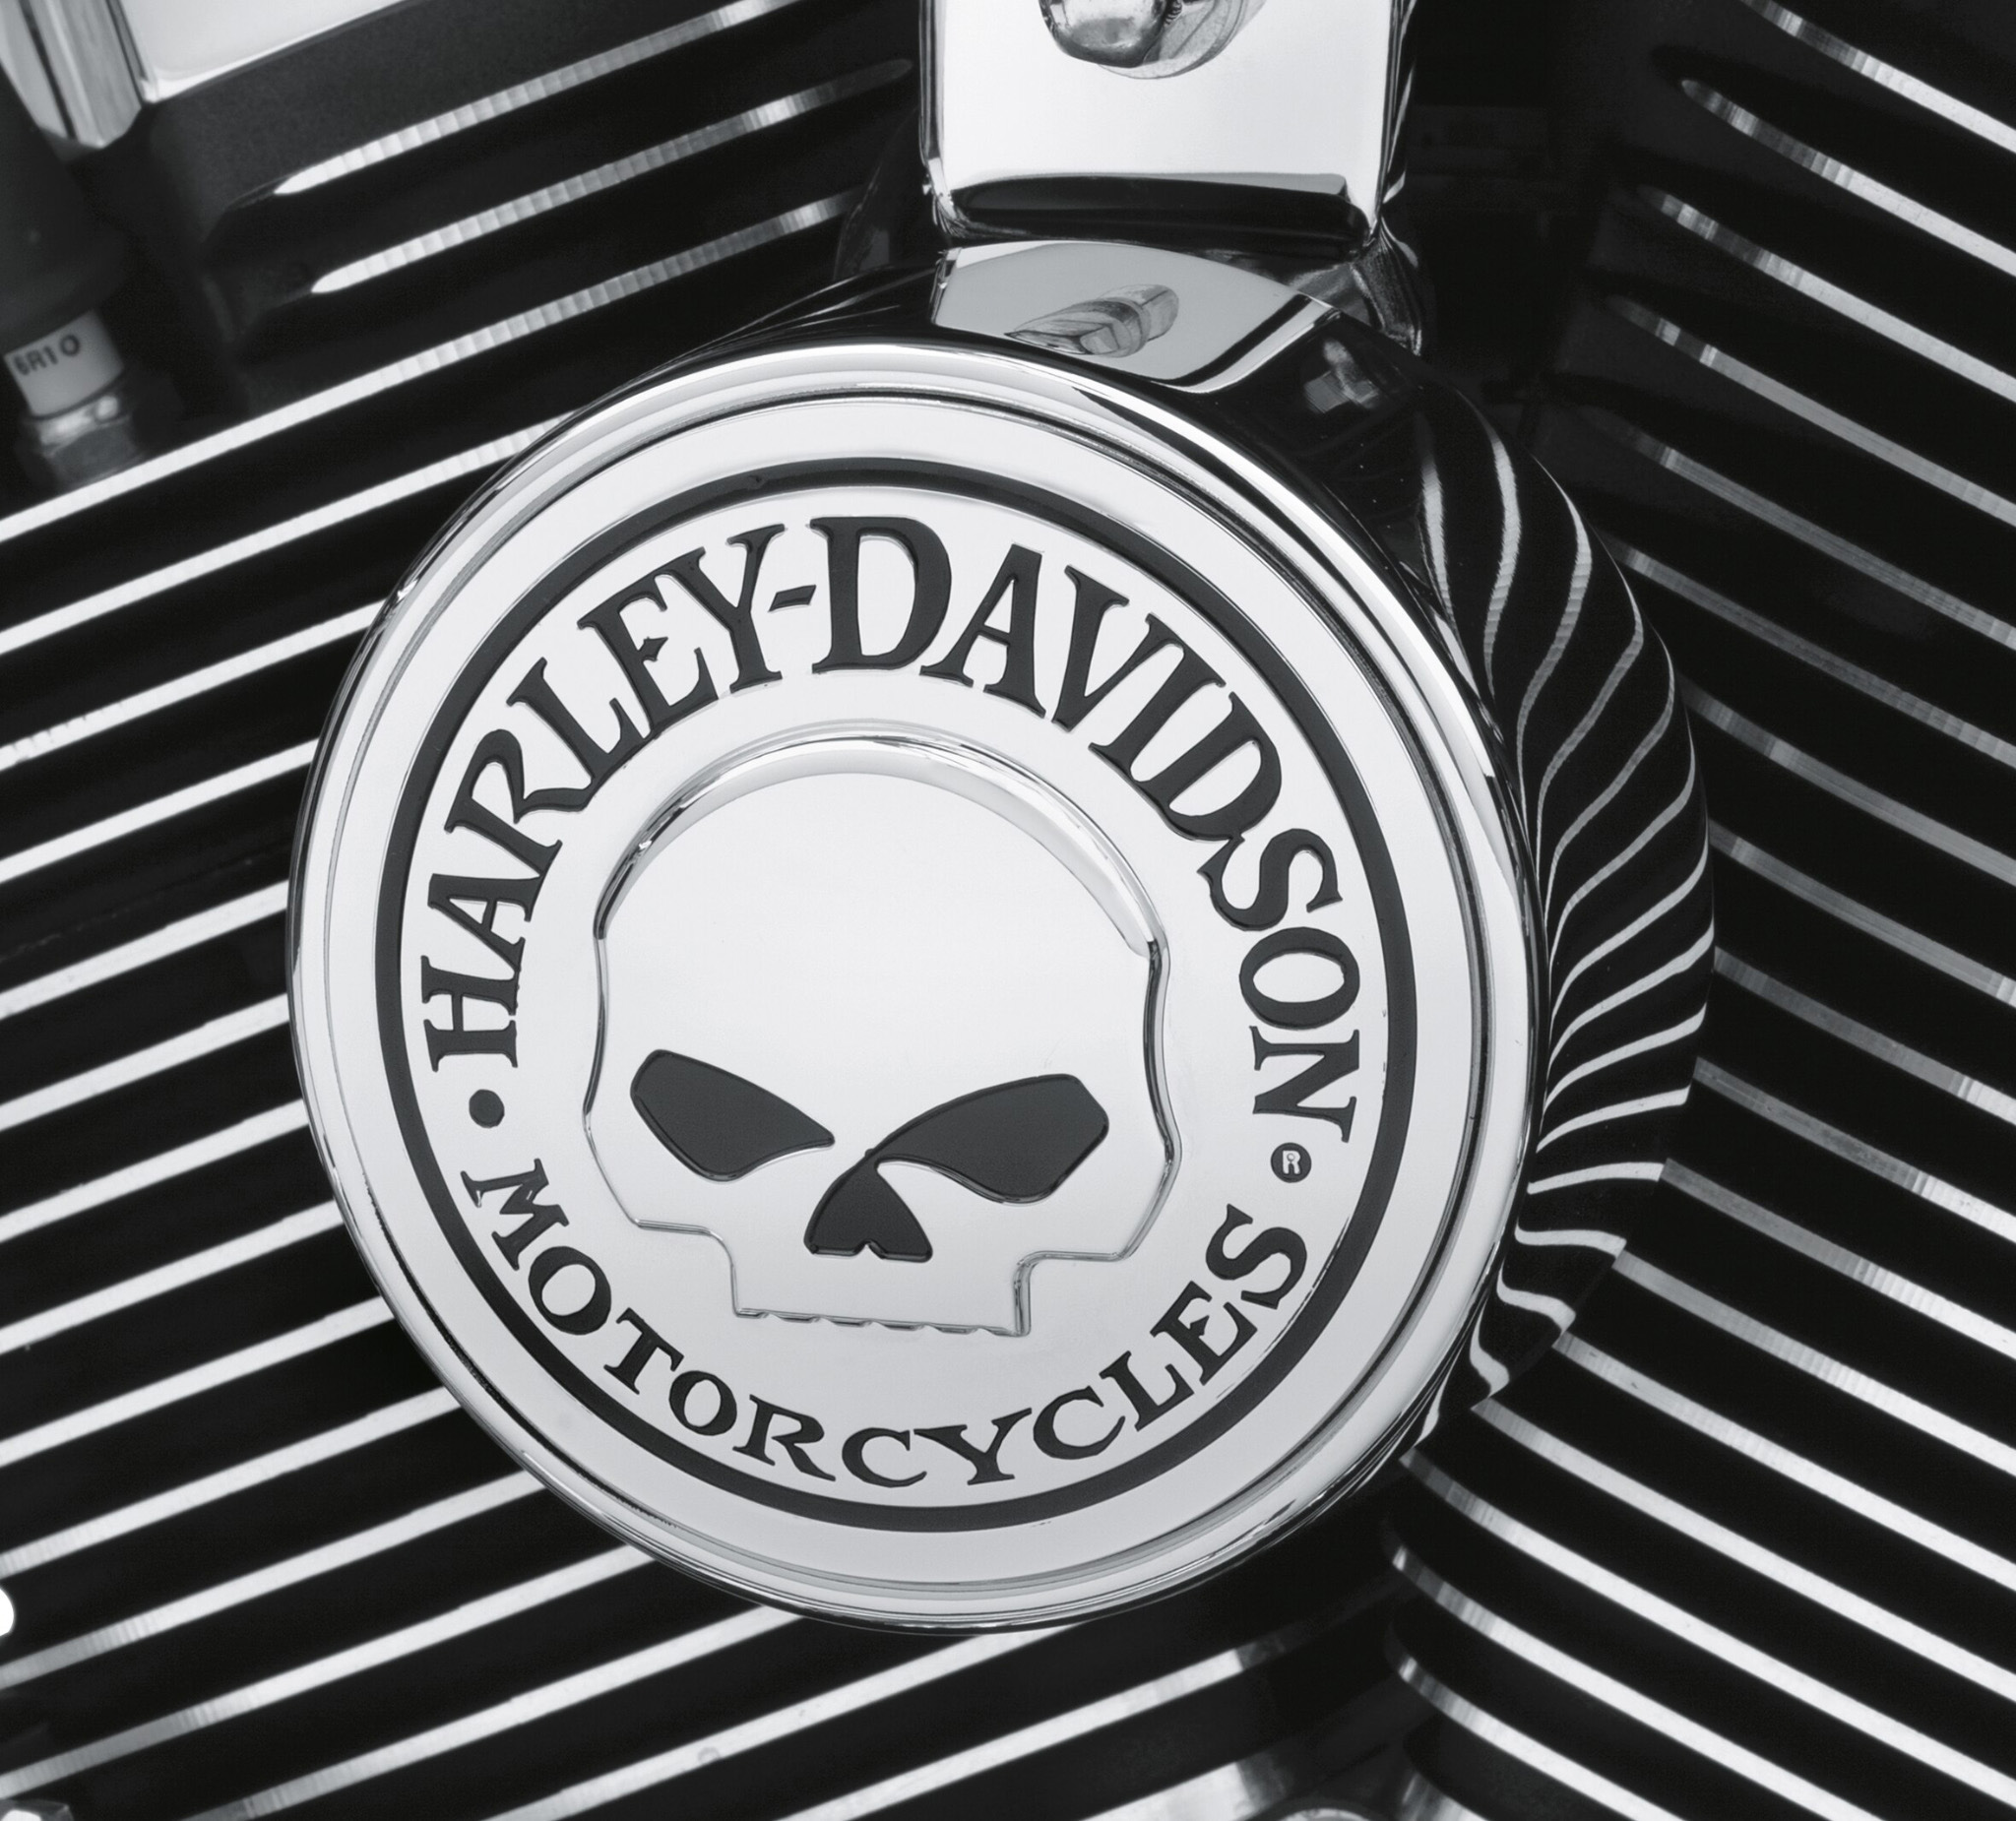 military horn covers harley davidson